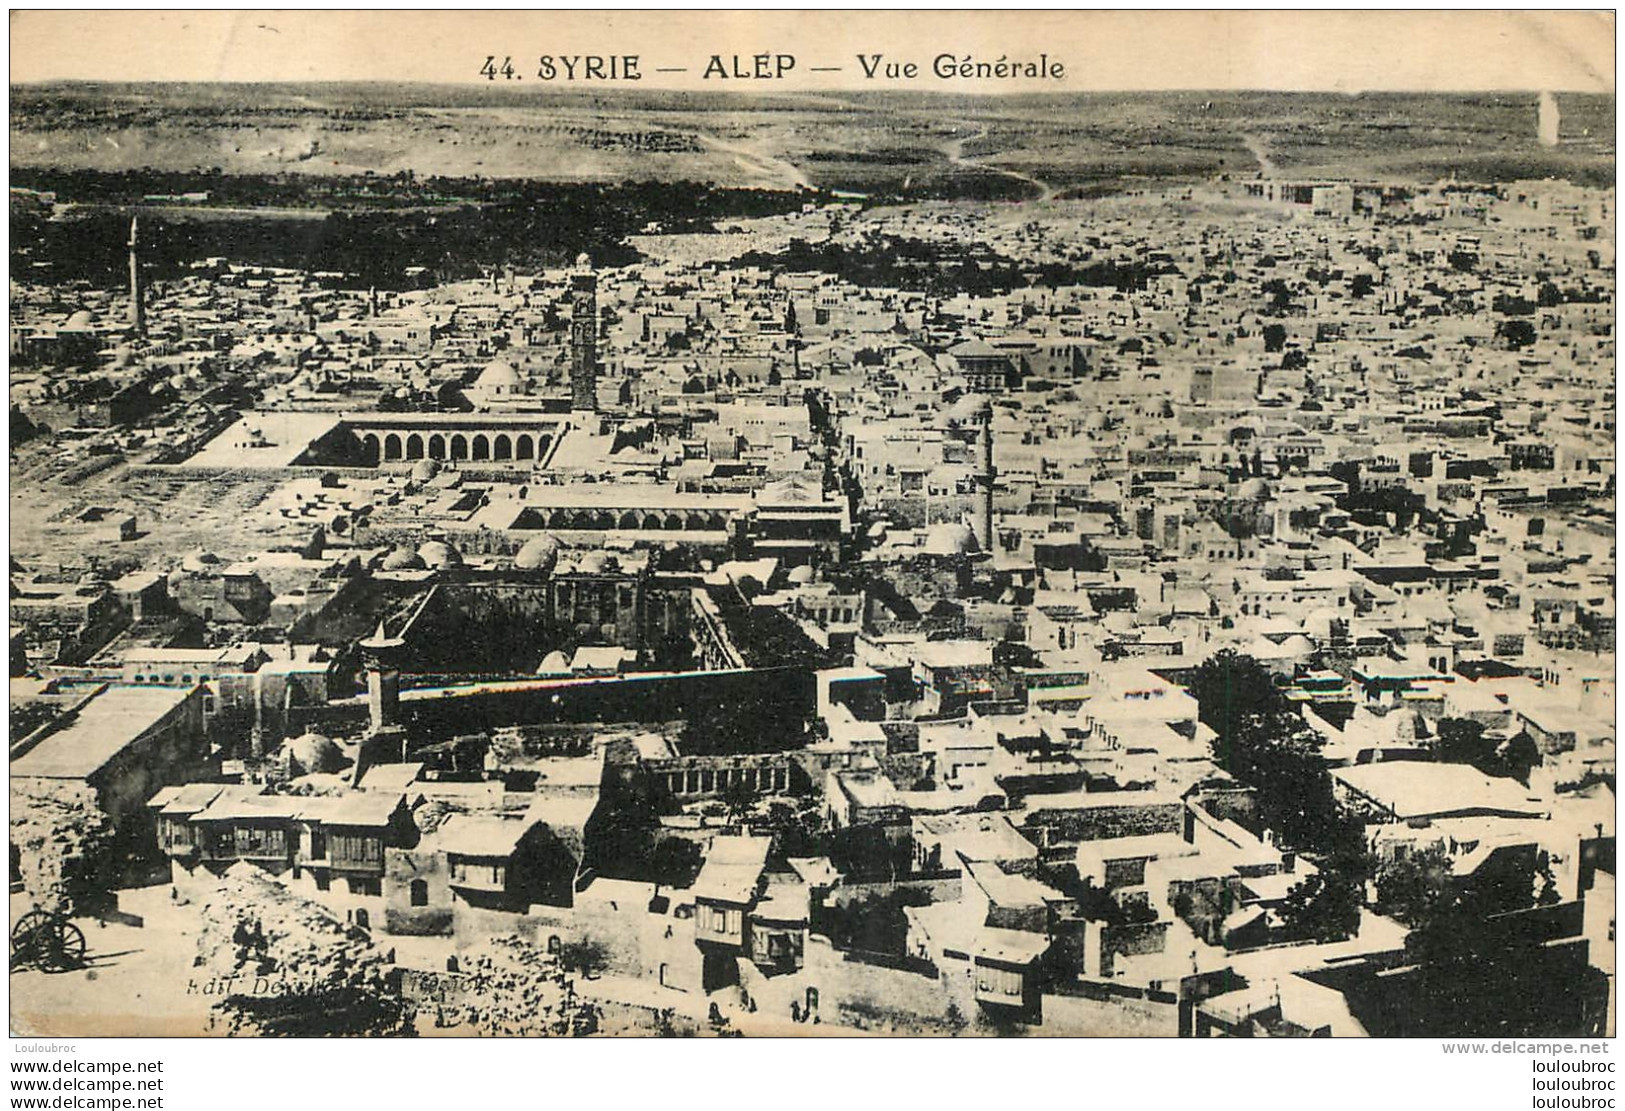 ALEP  VUE GENERALE - Syrie